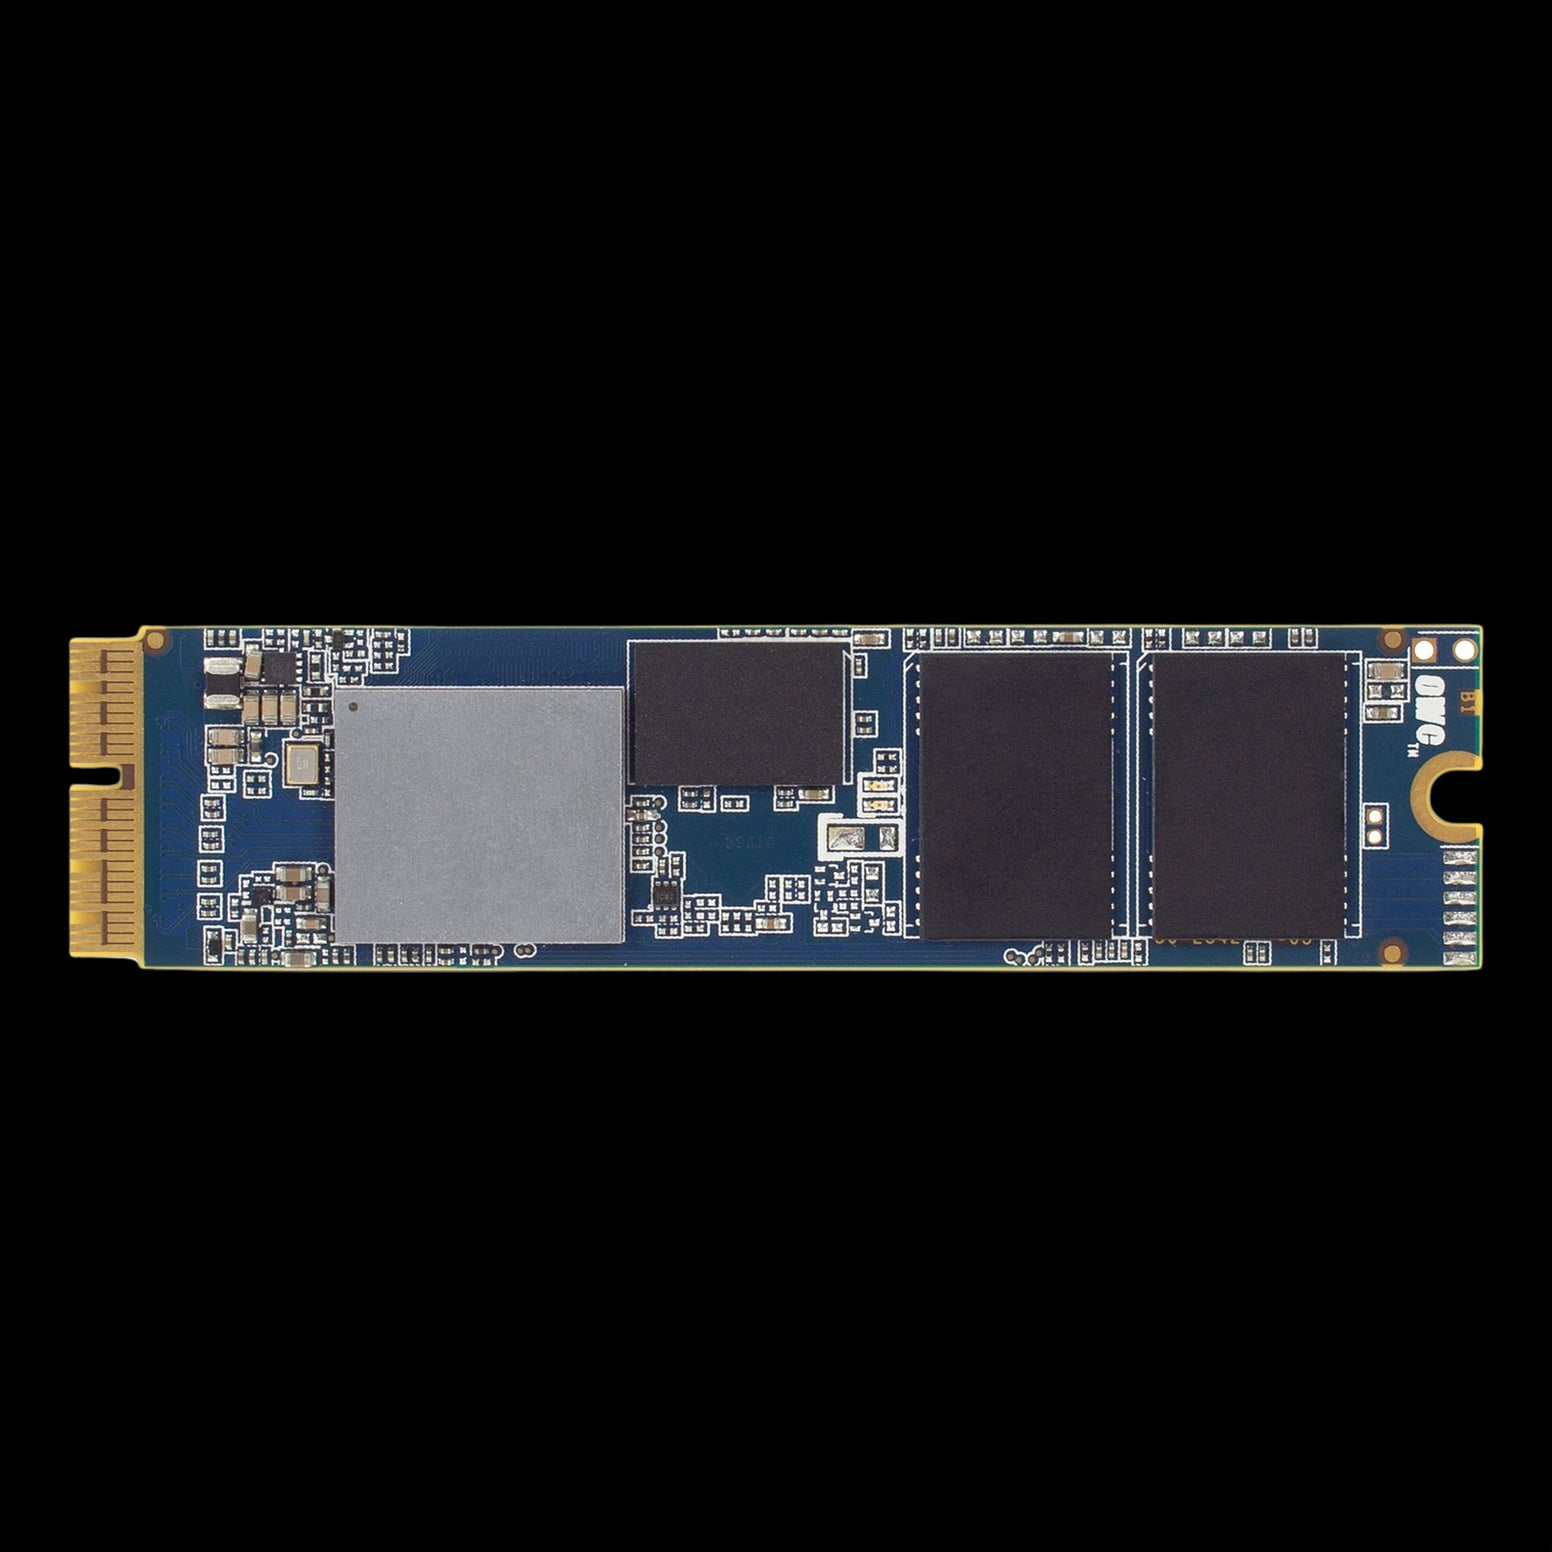 OWC 240GB Aura Pro X2 SSD with Upgrade Kit for Mac mini 2014 - Discontinued